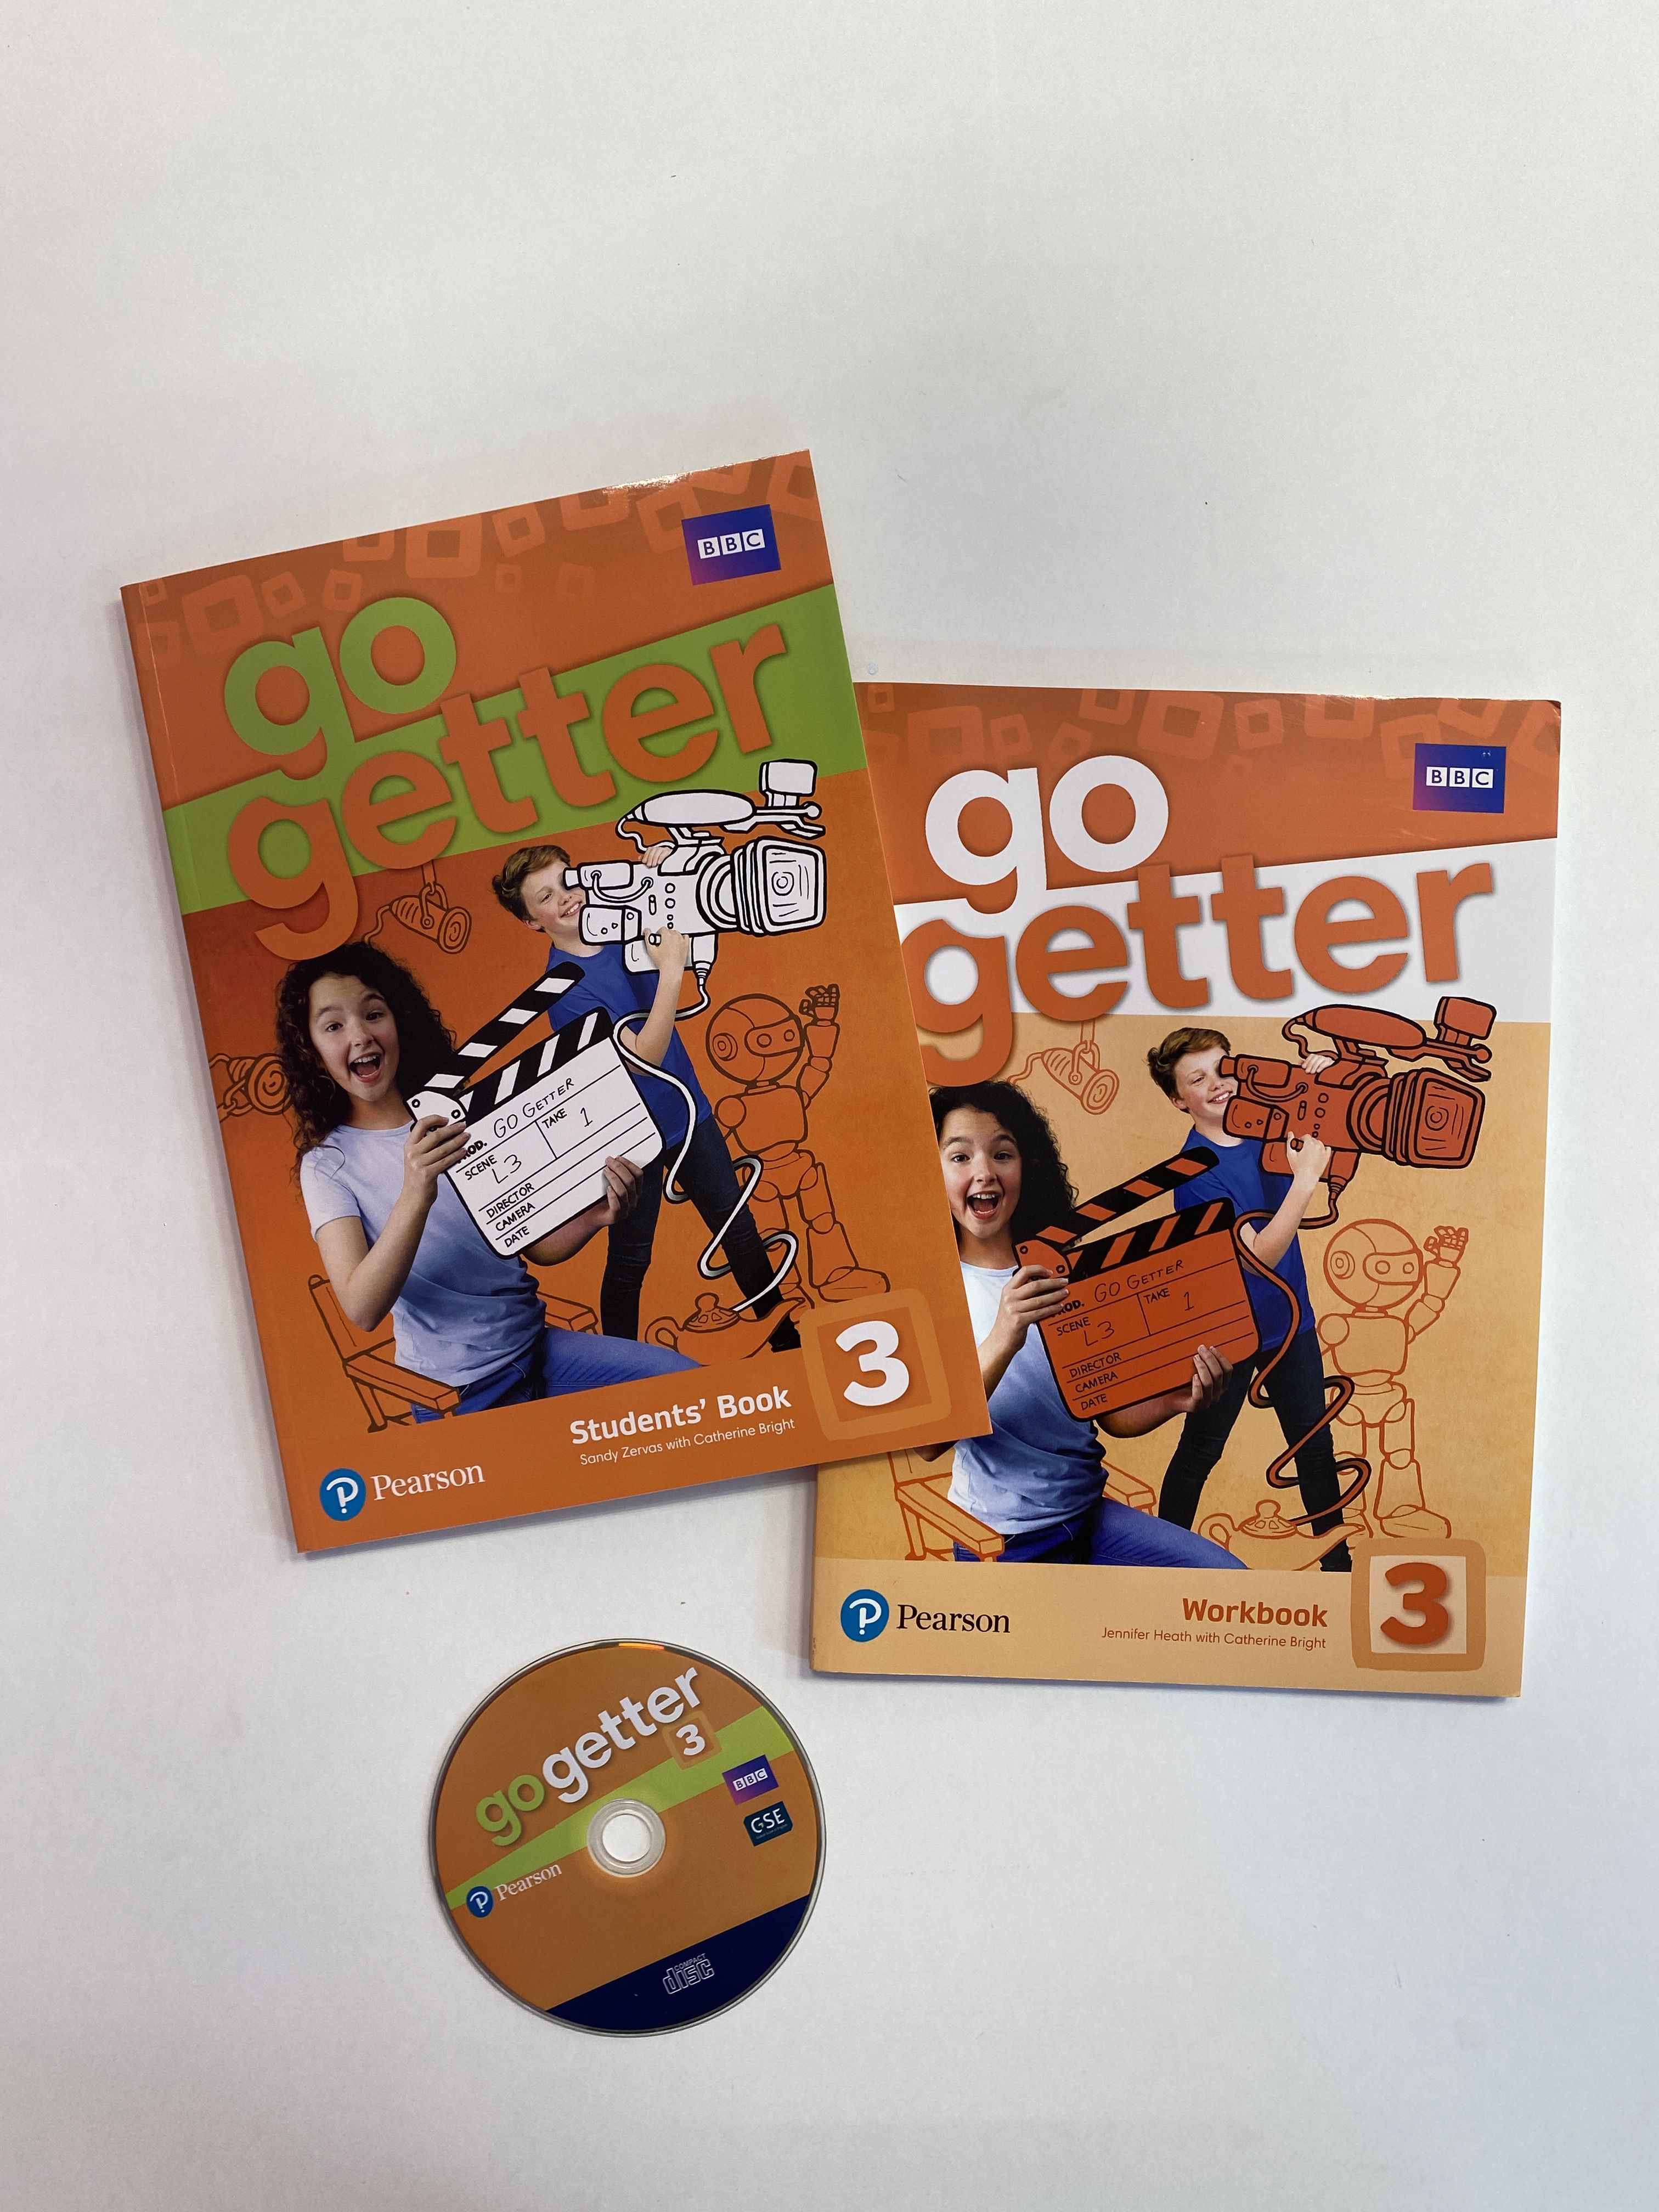 Go getter 3 рабочая тетрадь. Pearson go Getter 3 Workbook. Go Getter Pearson Workbook 1 listen and put the photos in the correct order a Panda, a Dolphin, an Ostrich.